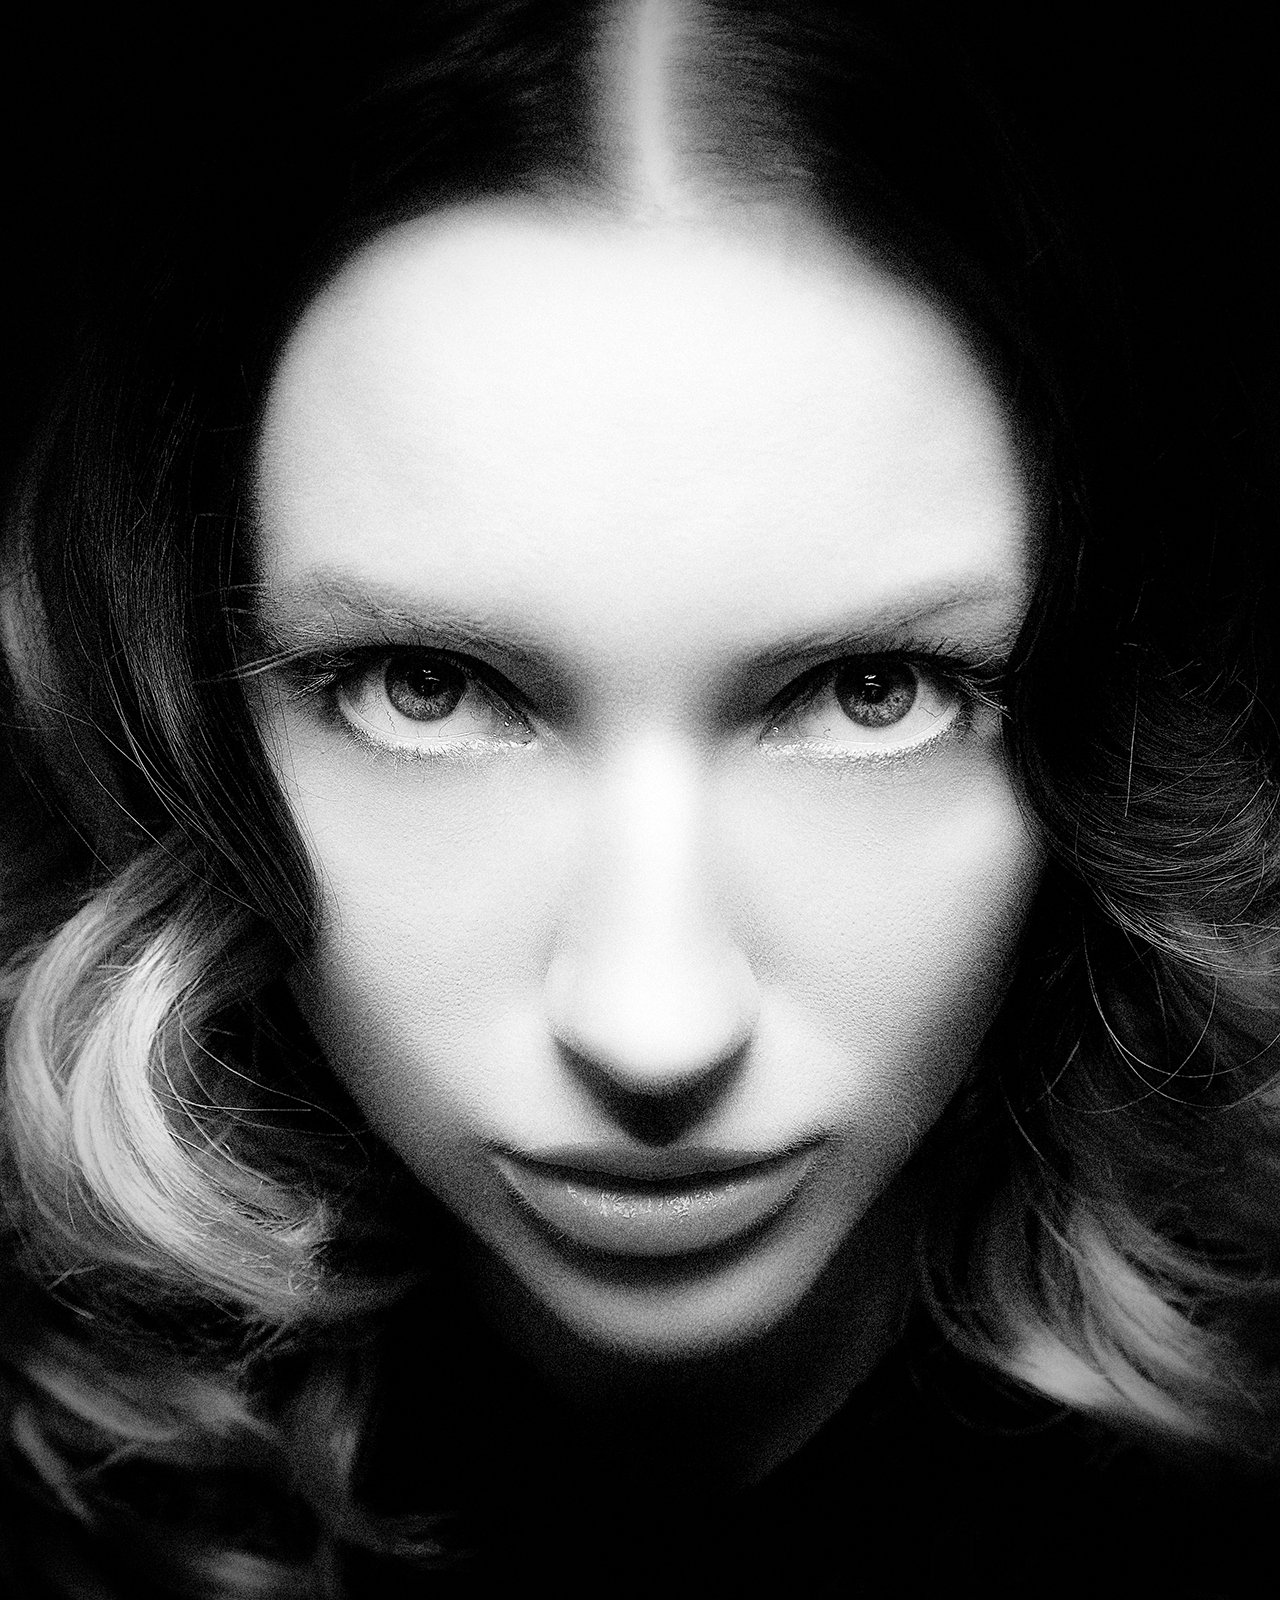 female, portrait, black and white, move, bonnie and clyde, killer, maniac, crime, criminal, woman, young, adult, girl, face, look, horror, retro, expression, mood, Дмитрий Толоконов